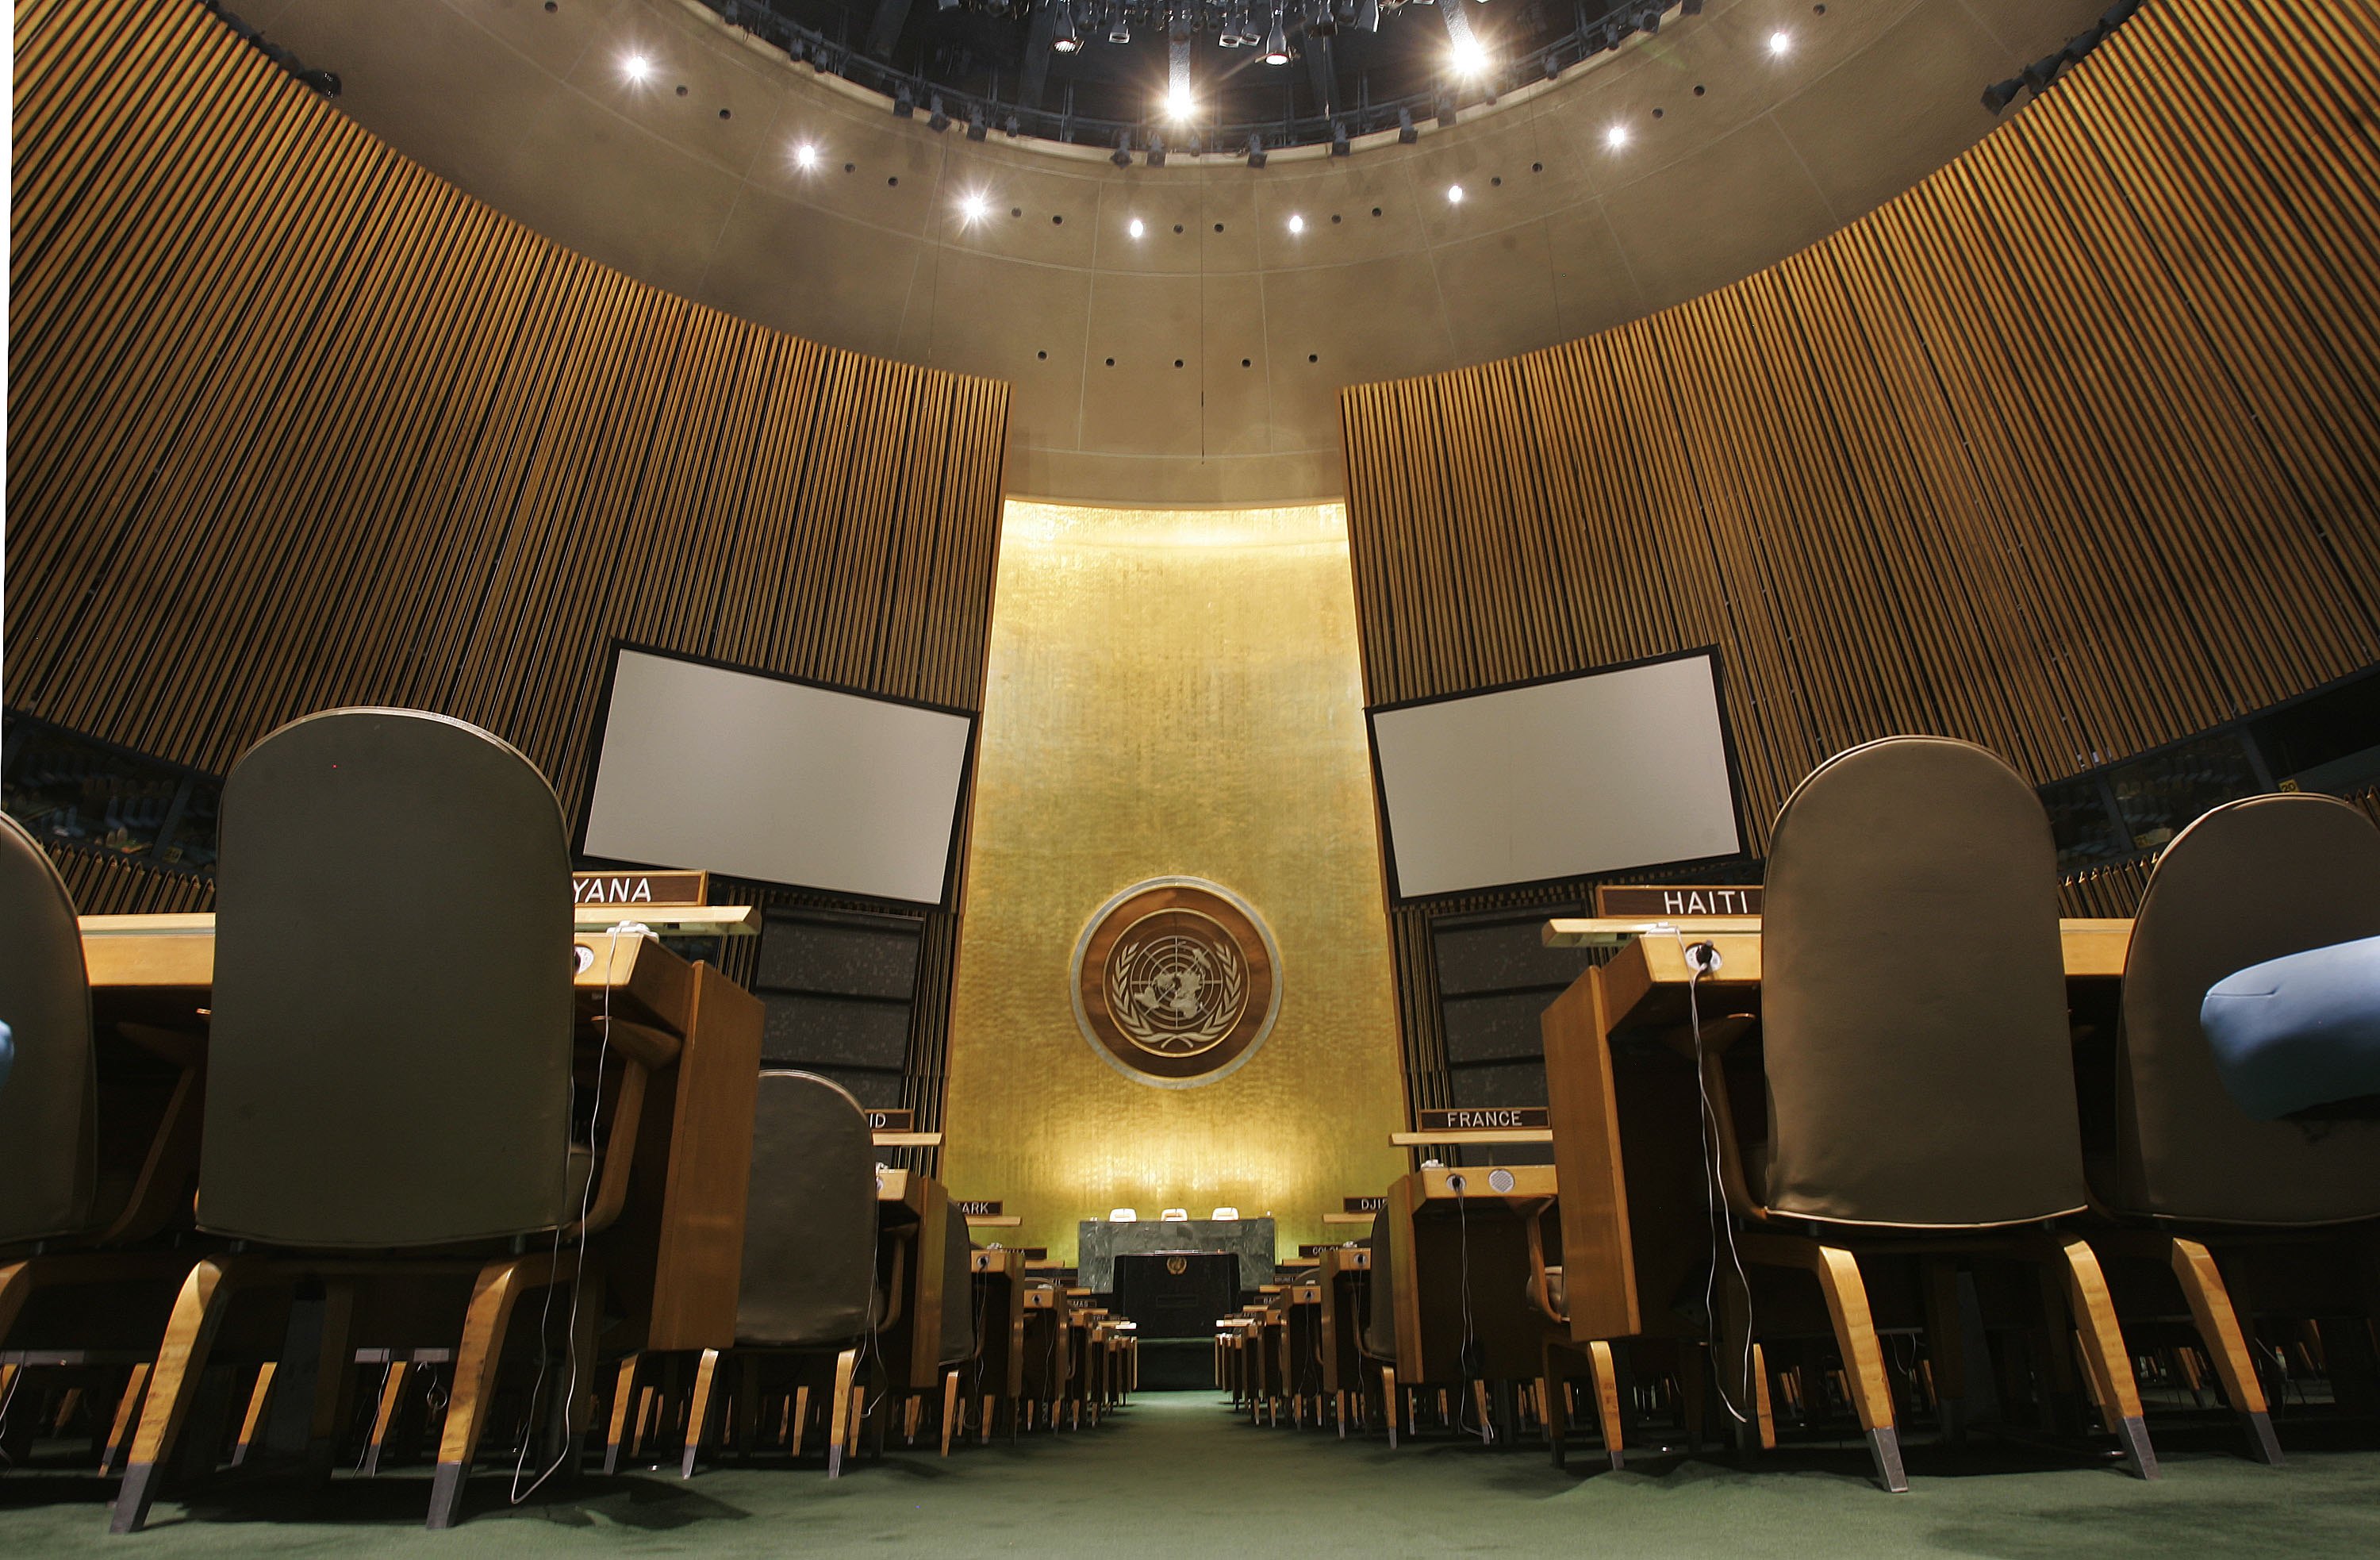 The General Assembly Hall of the United Nations in New York City. (Chris Hondros—Getty Images)